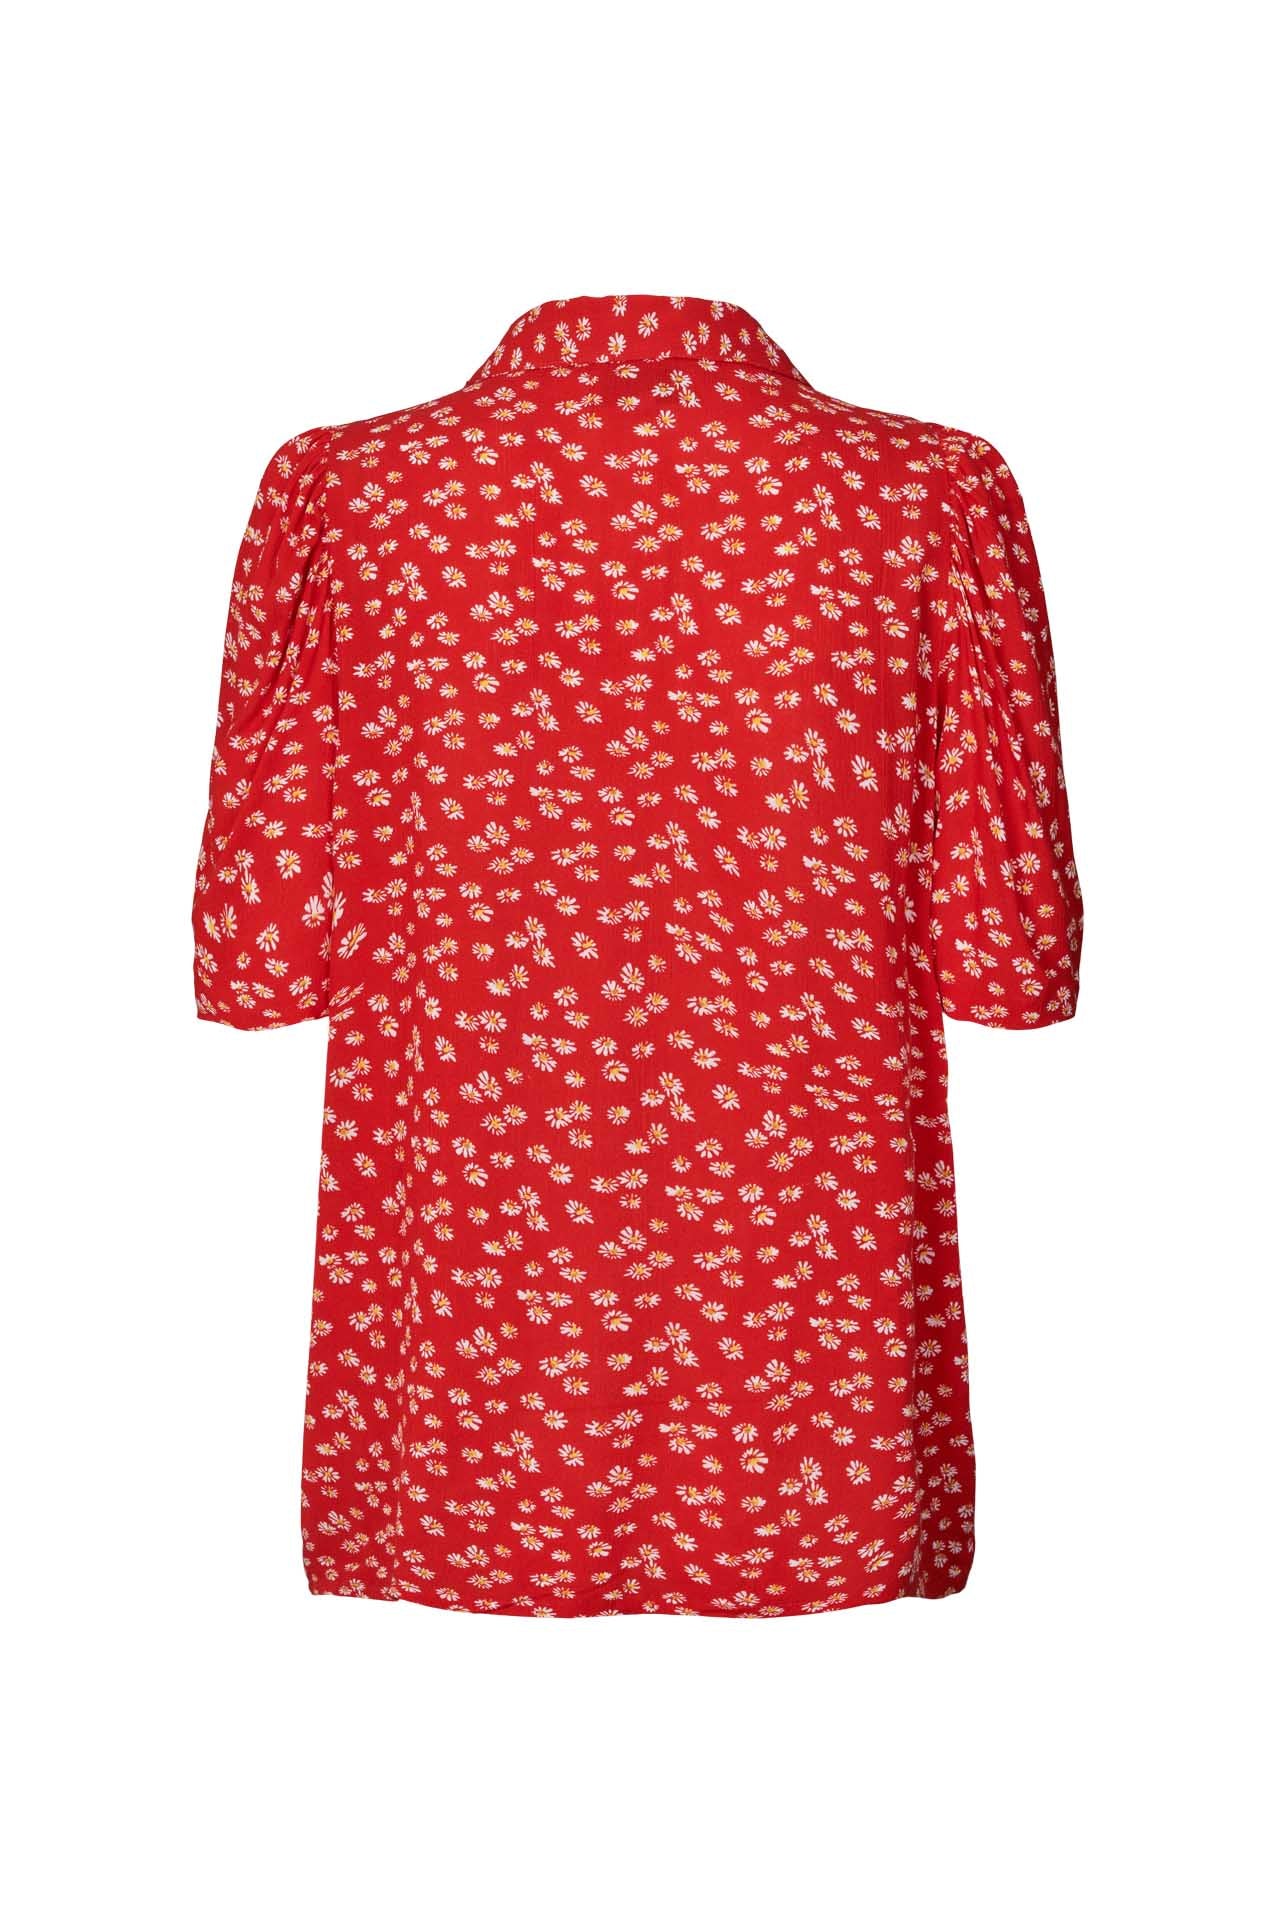 Lollys Laundry Aby Shirt - Red/Flower Print